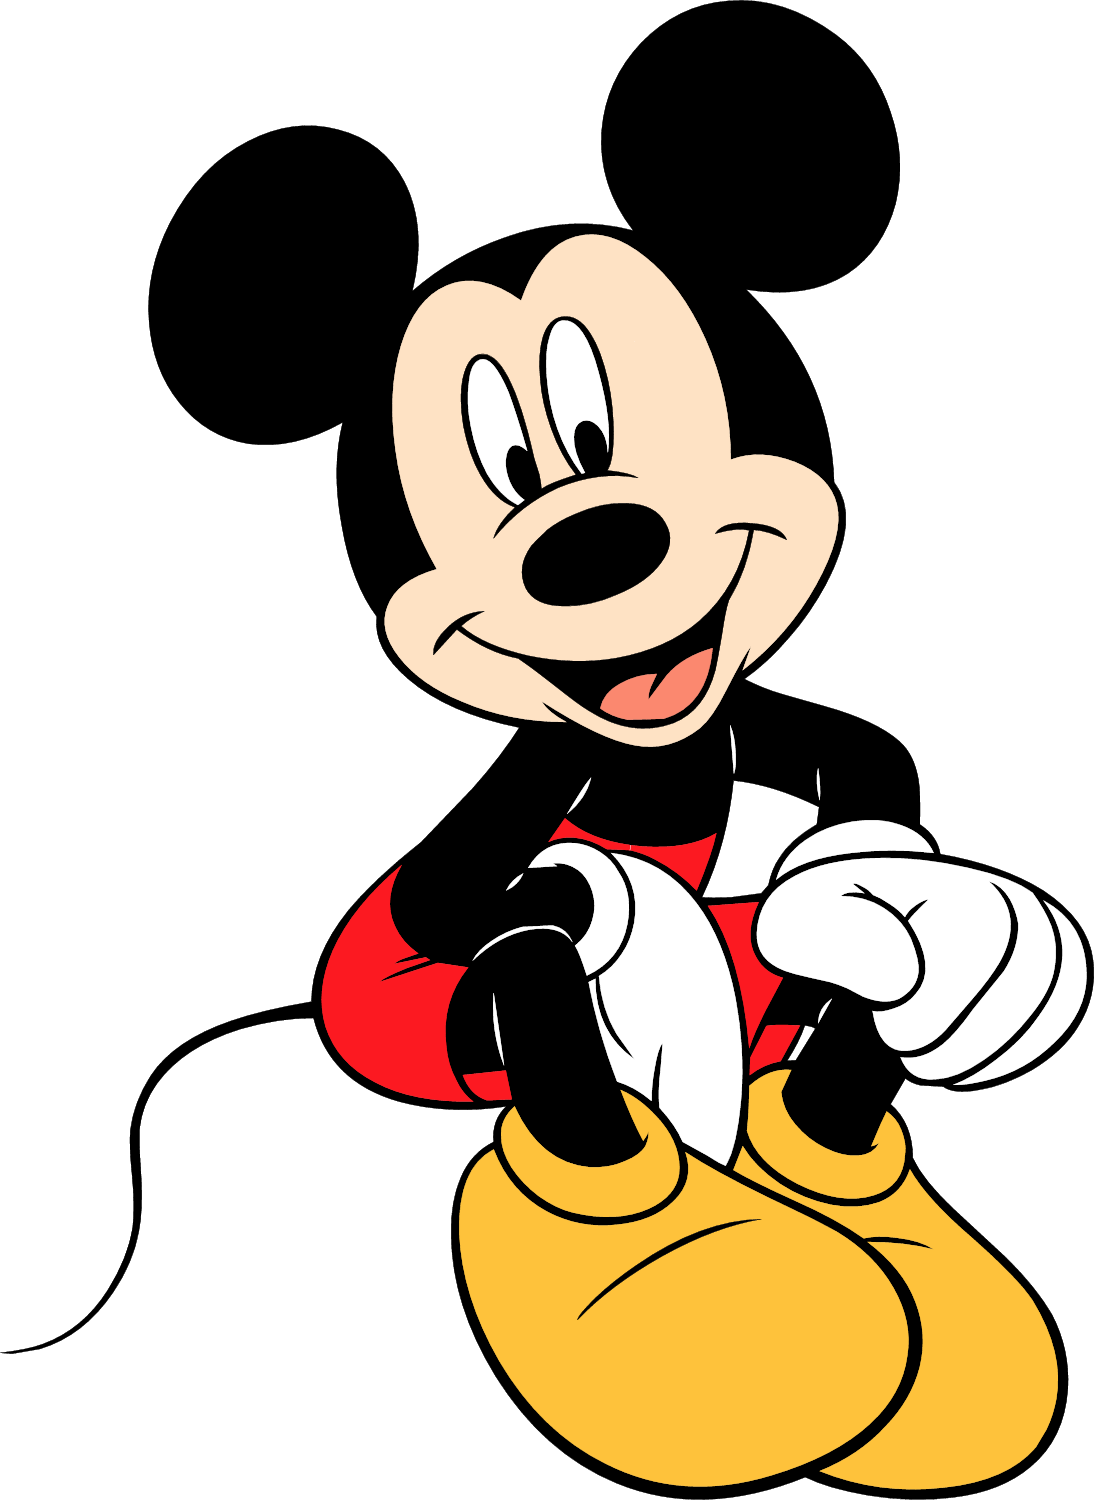 Gloves clipart mickey. Mouse png image purepng